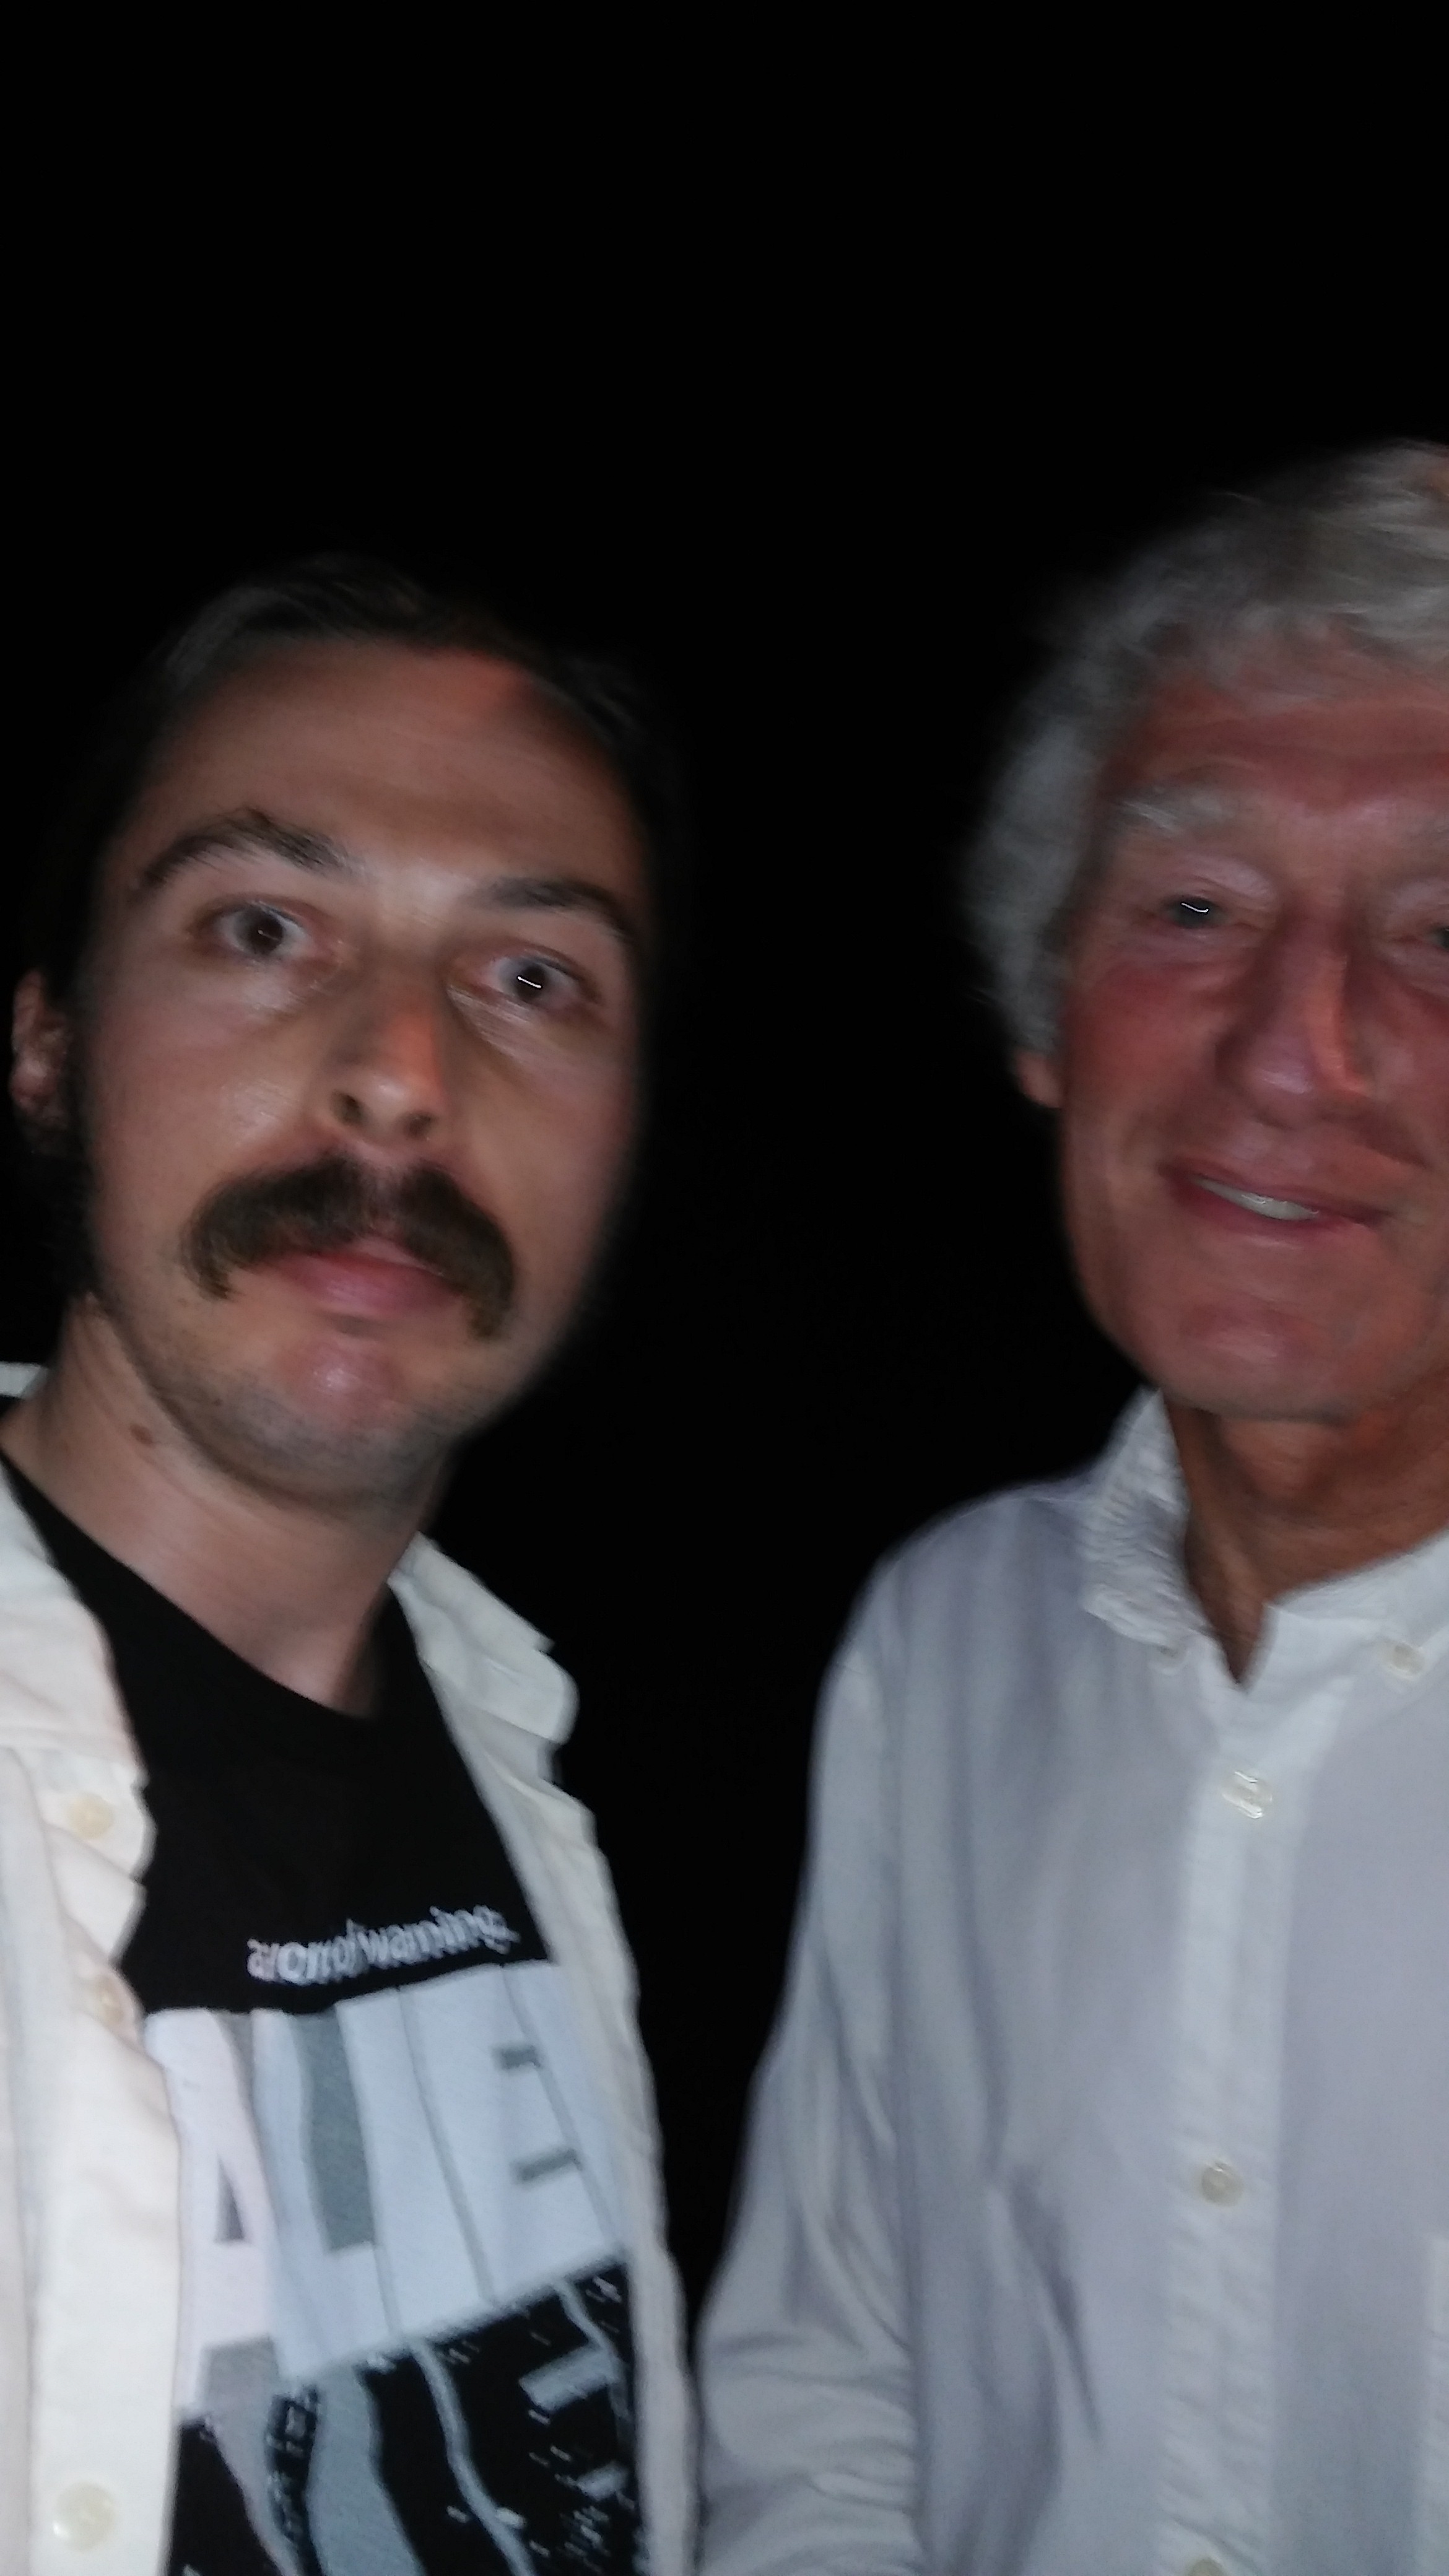 With Roger Deakins at a screening of Sicario.